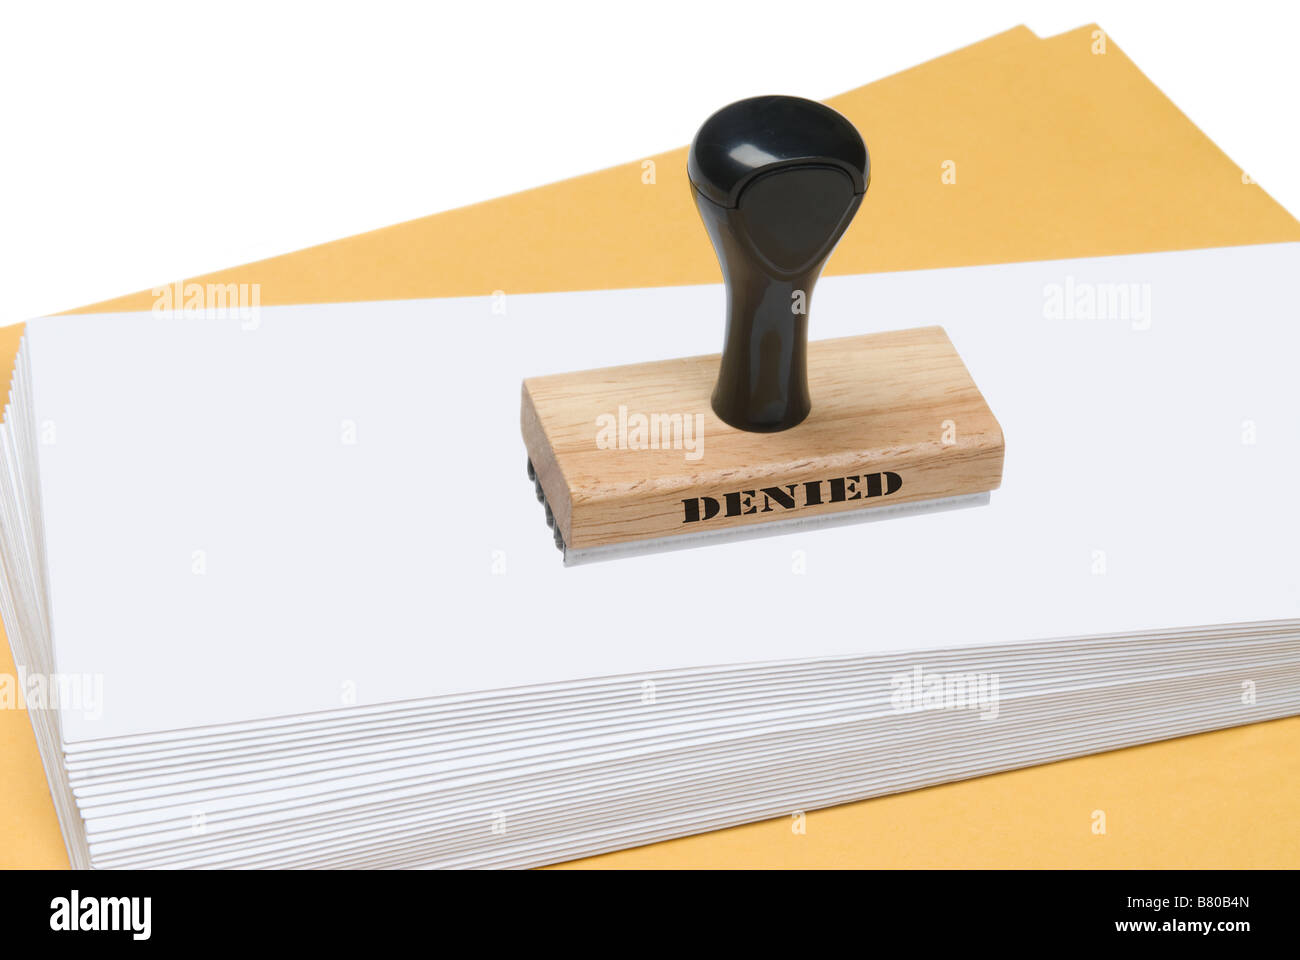 A denial rubber stamp on envelopes ready to send a message Stock Photo